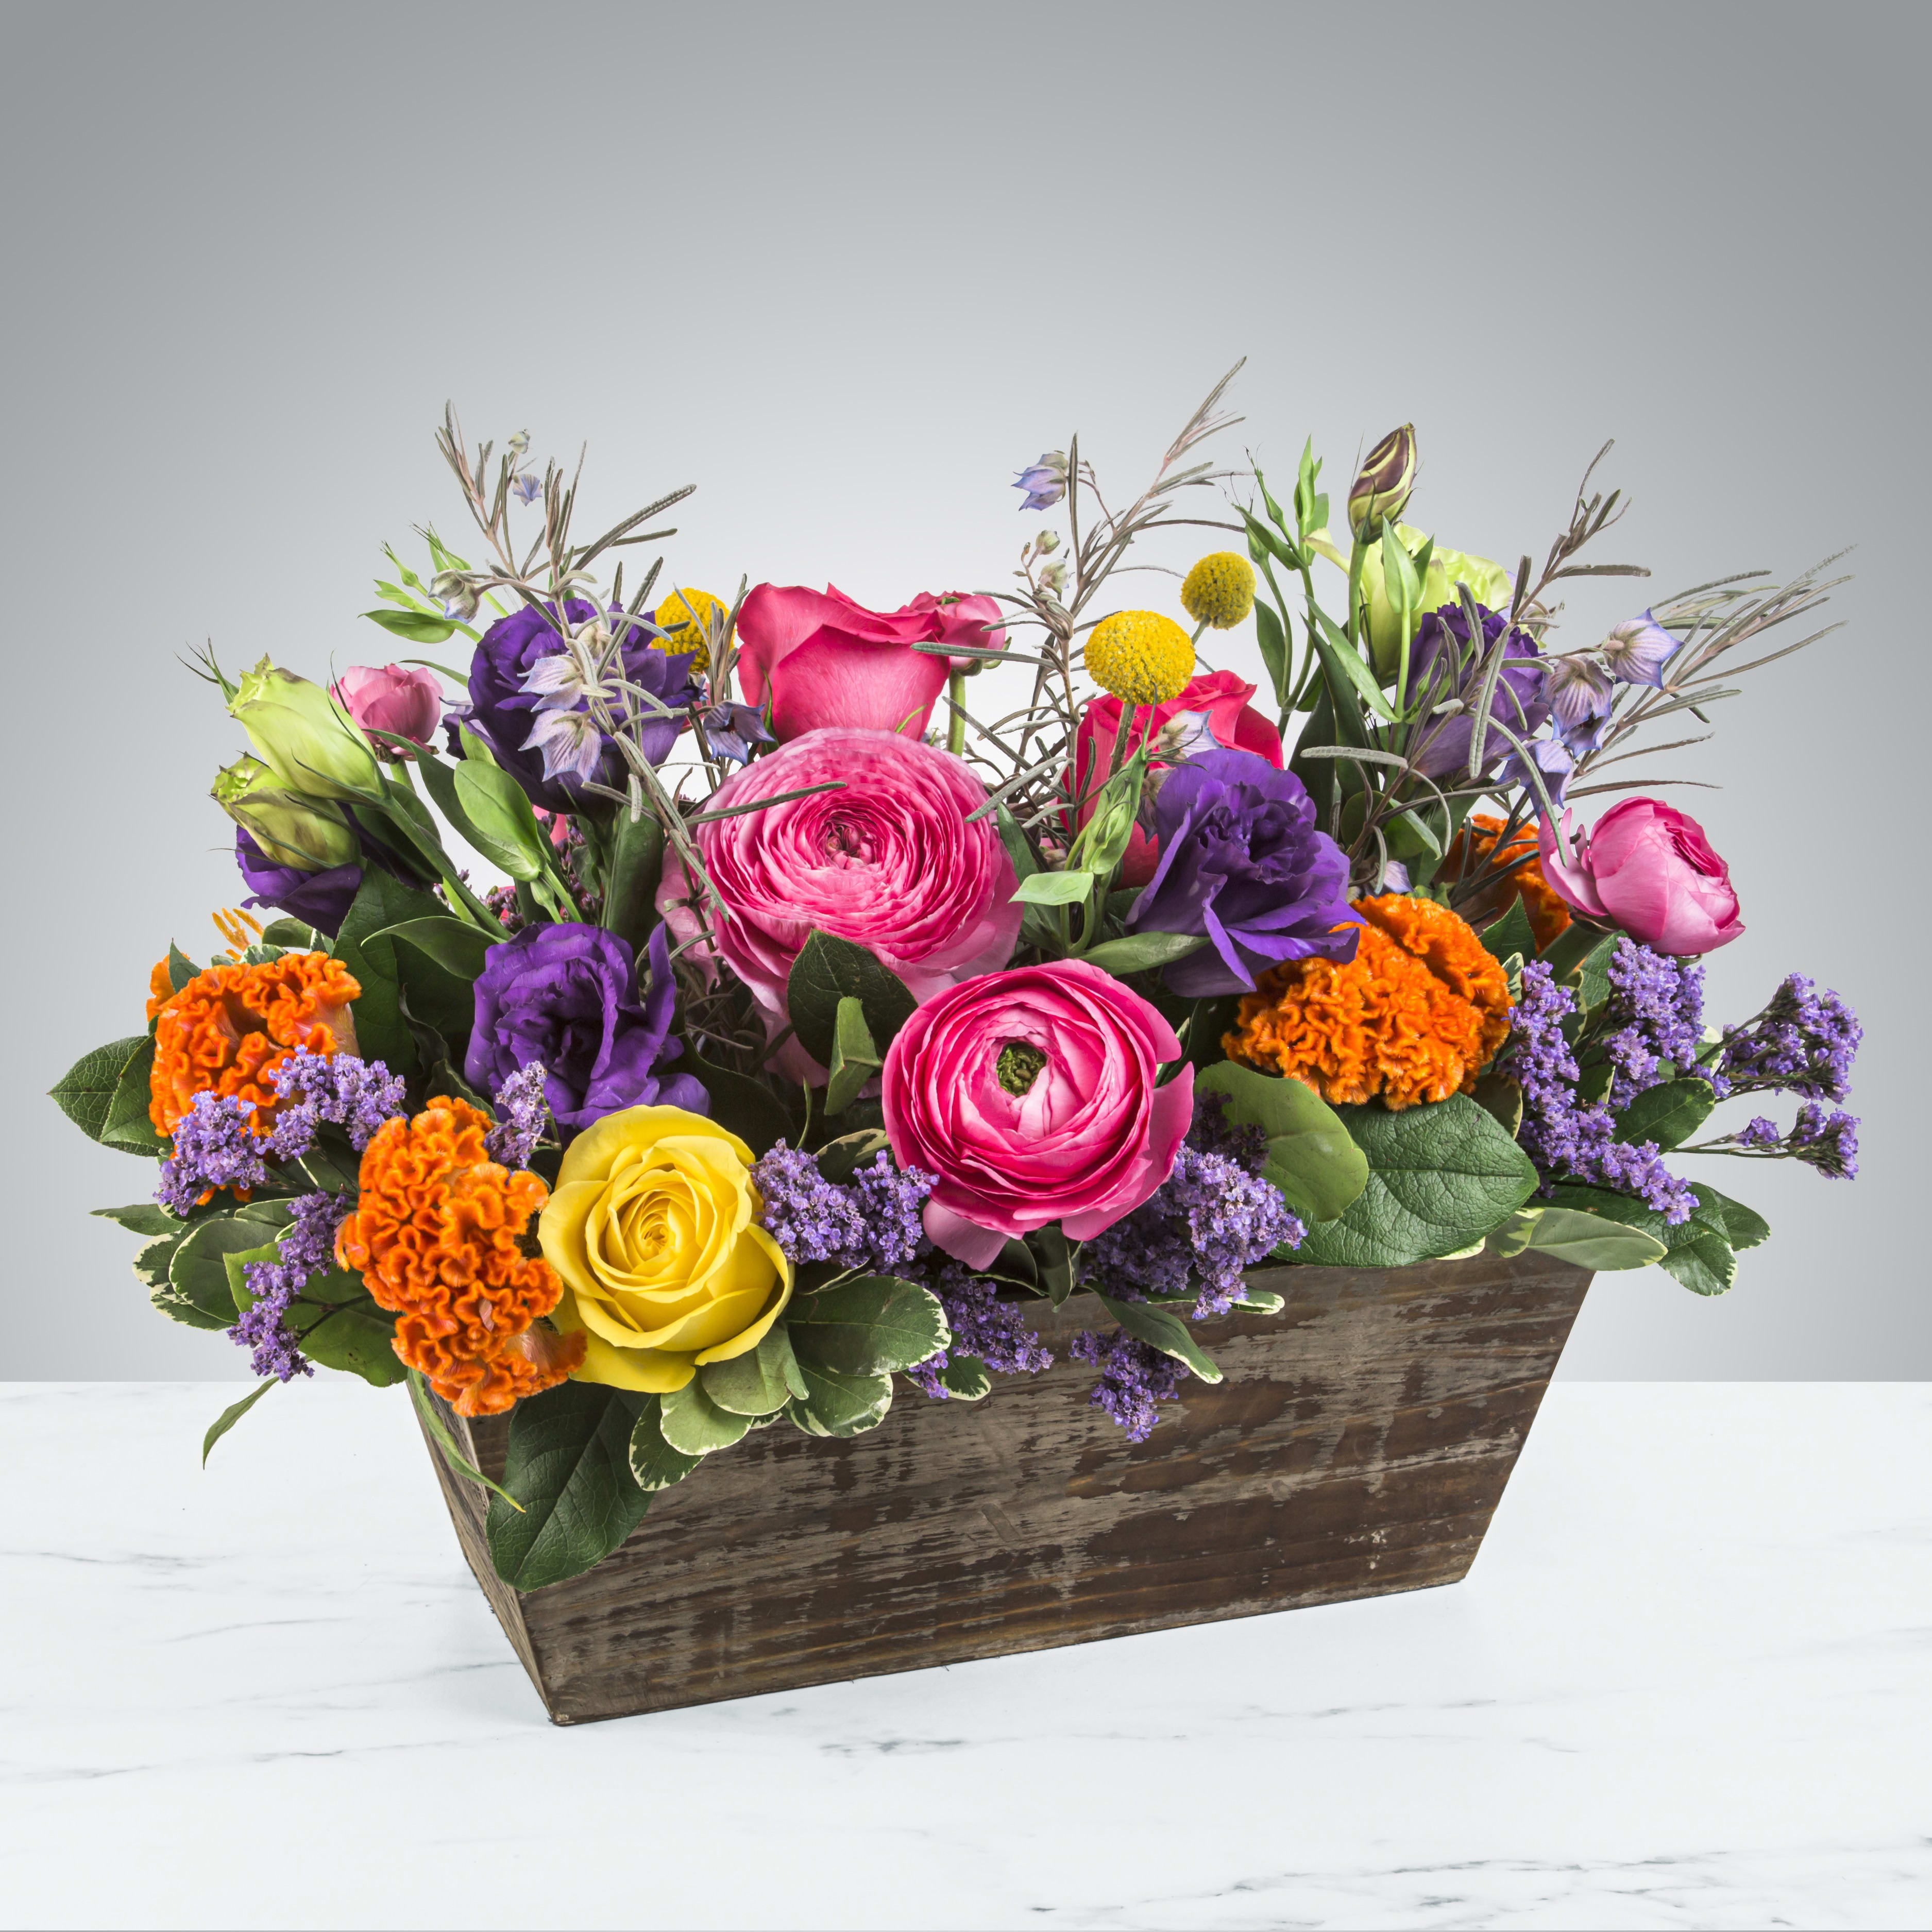 Groovy - Keep things fun with this jewel toned flower box! Ranunculus, roses, and lisianthus in a wooden garden box give this arrangement its bright colors and textures to create a beautiful centerpiece or gift.      APPROXIMATE DIMENSIONS 18&quot; W X 10&quot; H